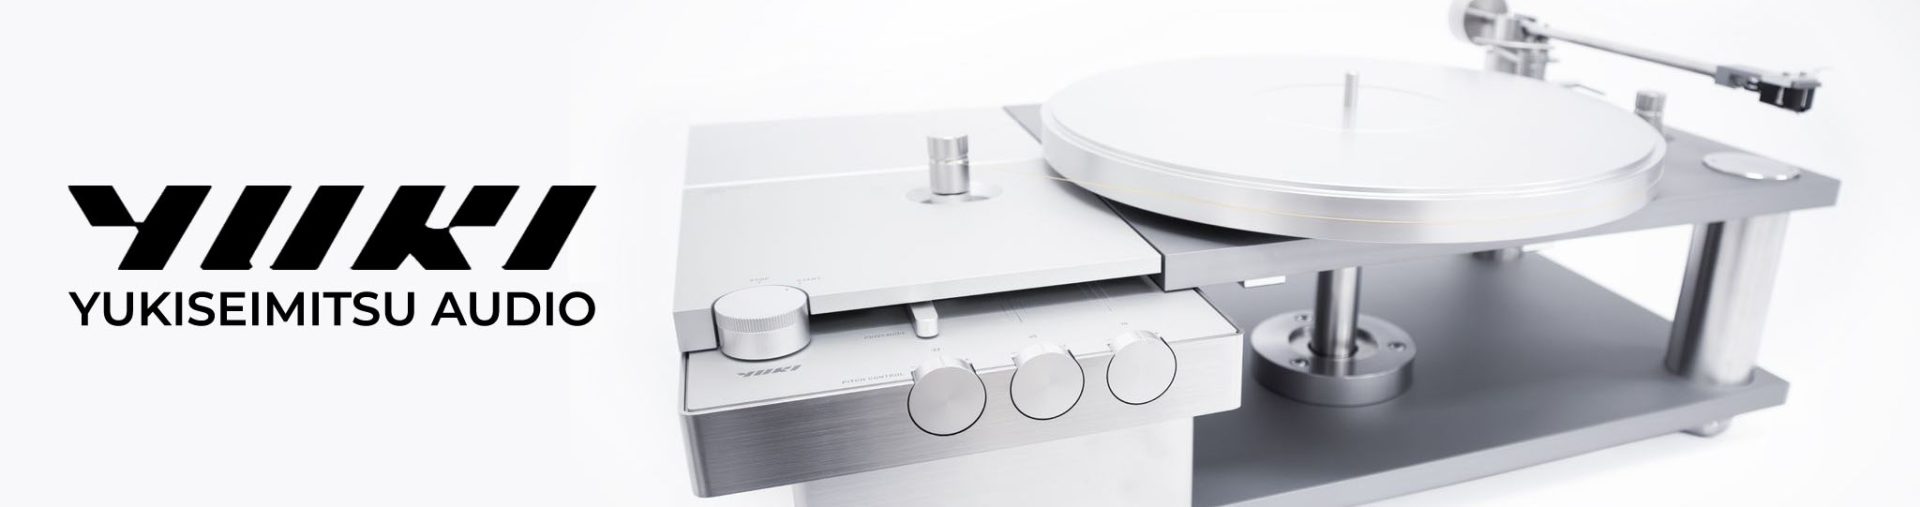 YUKISEIMITSU AUDIO Turntables available for dealers from American Sound Distribution